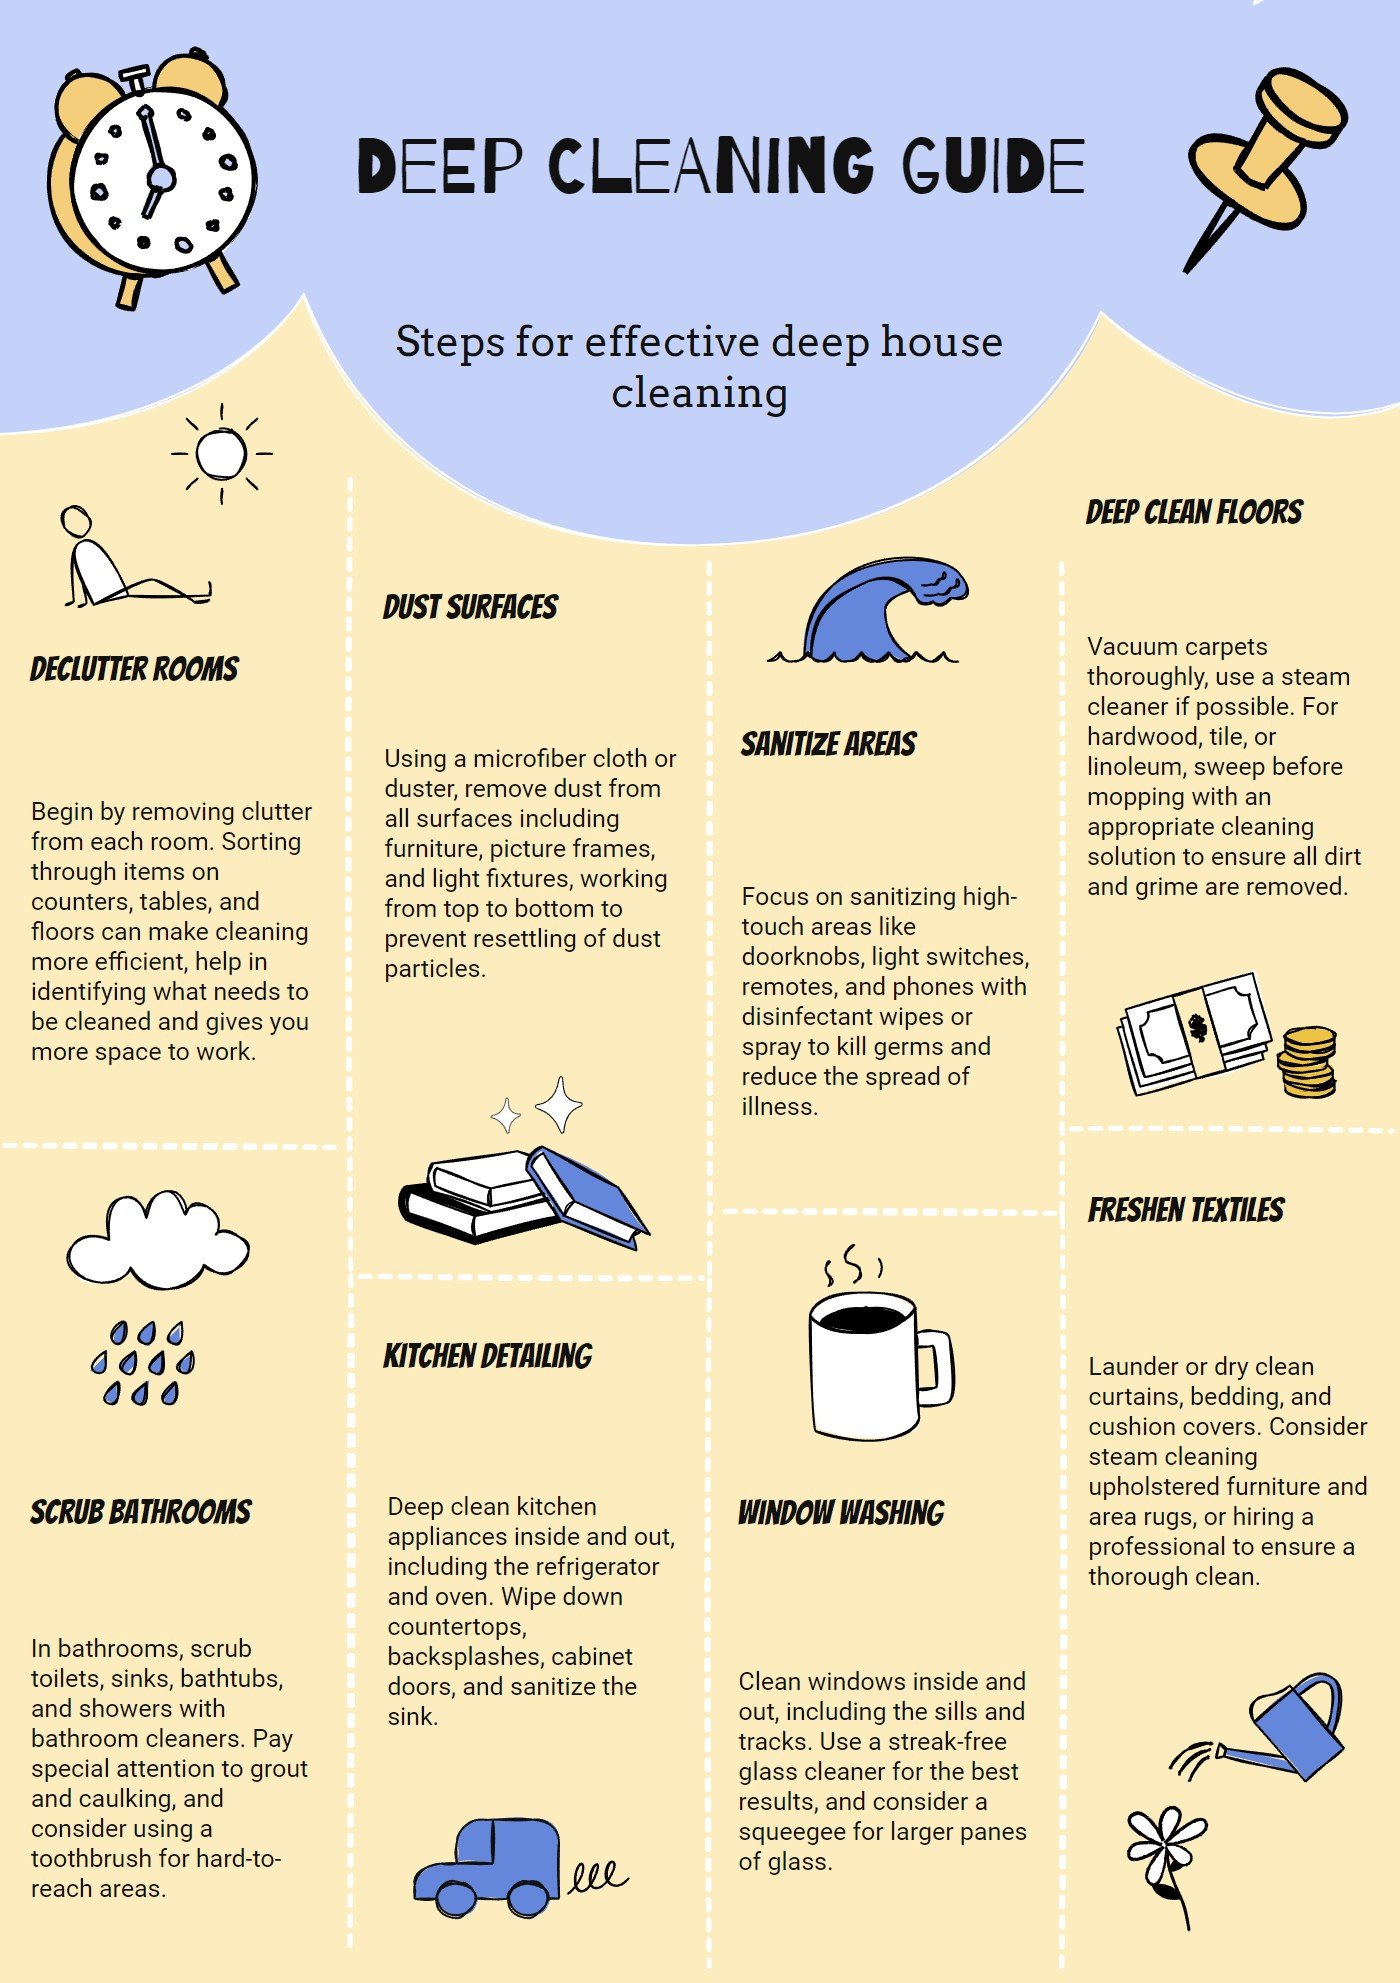 Infographic outlining steps and tips for a comprehensive deep cleaning guide, covering room organization, surface dusting, floor cleaning, window washing, kitchen detailing, and refreshing textiles.